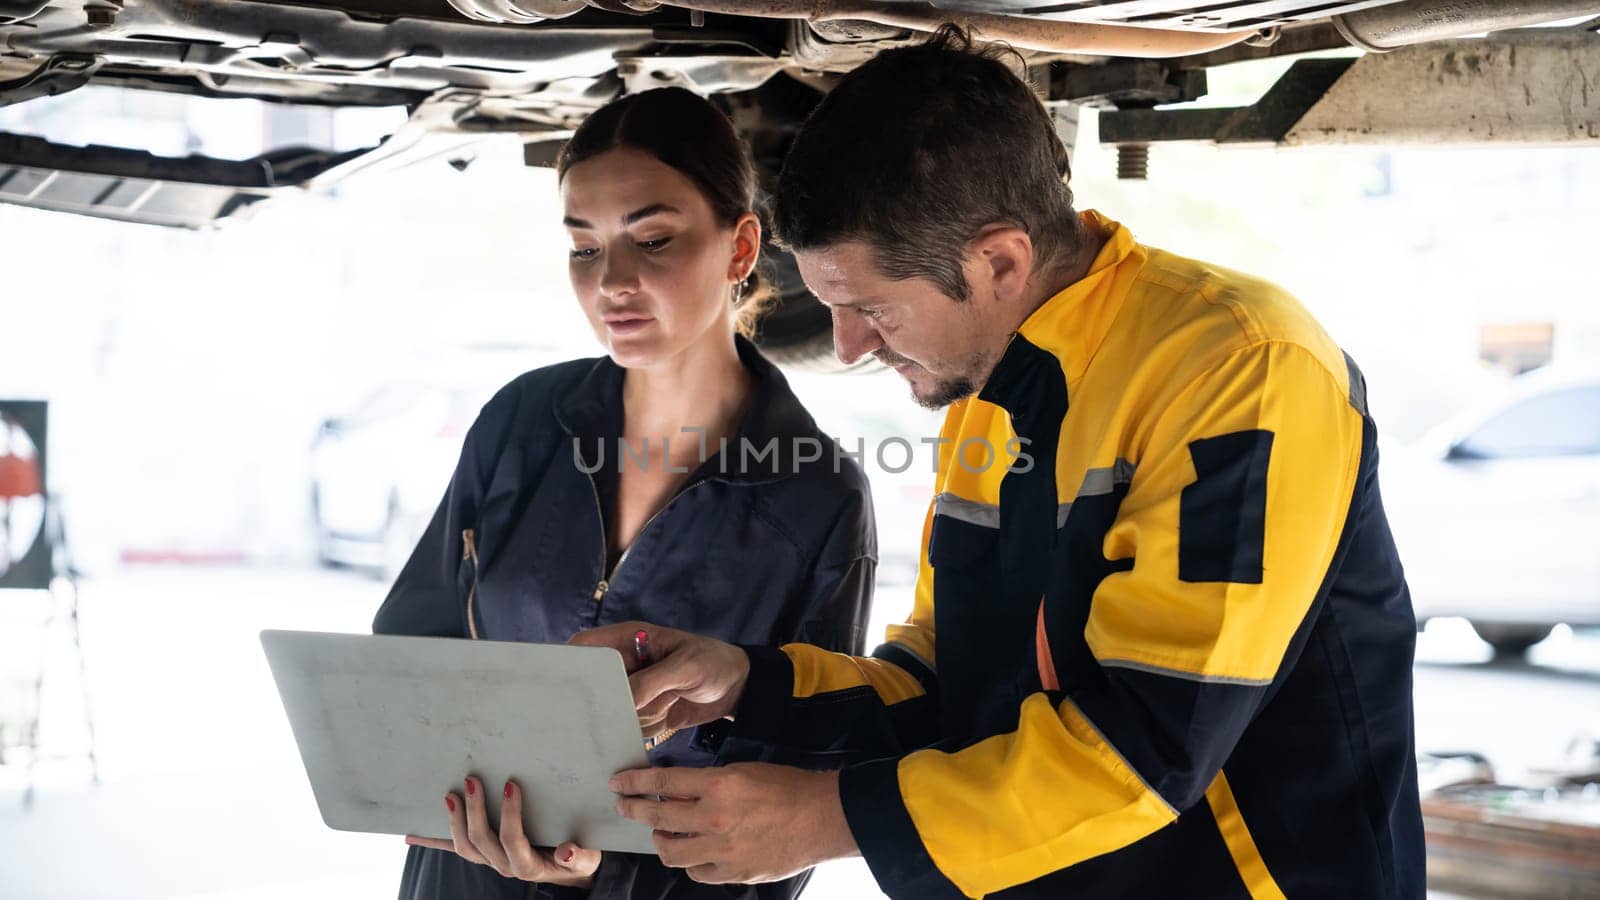 Two vehicle mechanic working together underneath lifted car, conduct car inspection with laptop. Automotive service technician in uniform carefully make diagnostic troubleshooting. Panorama Oxus